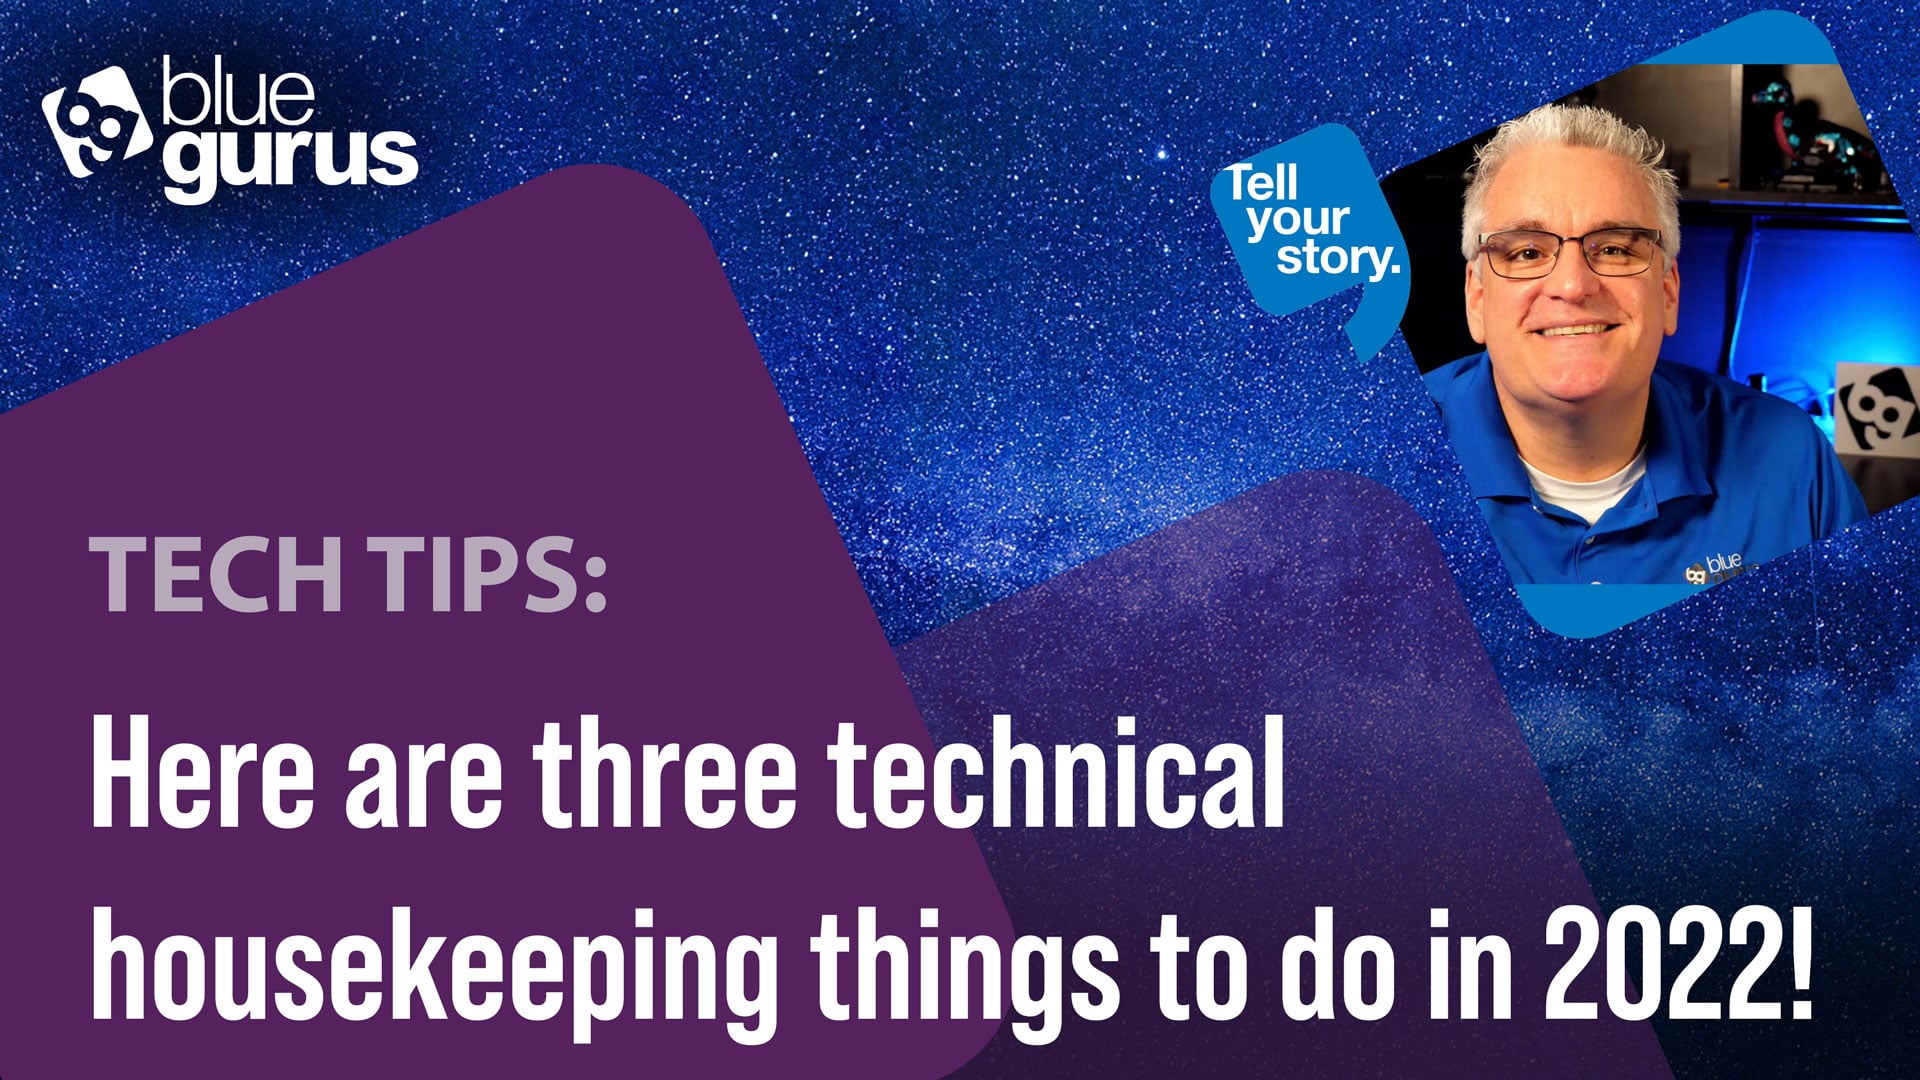 Here are three technical housekeeping things to do in 2022!